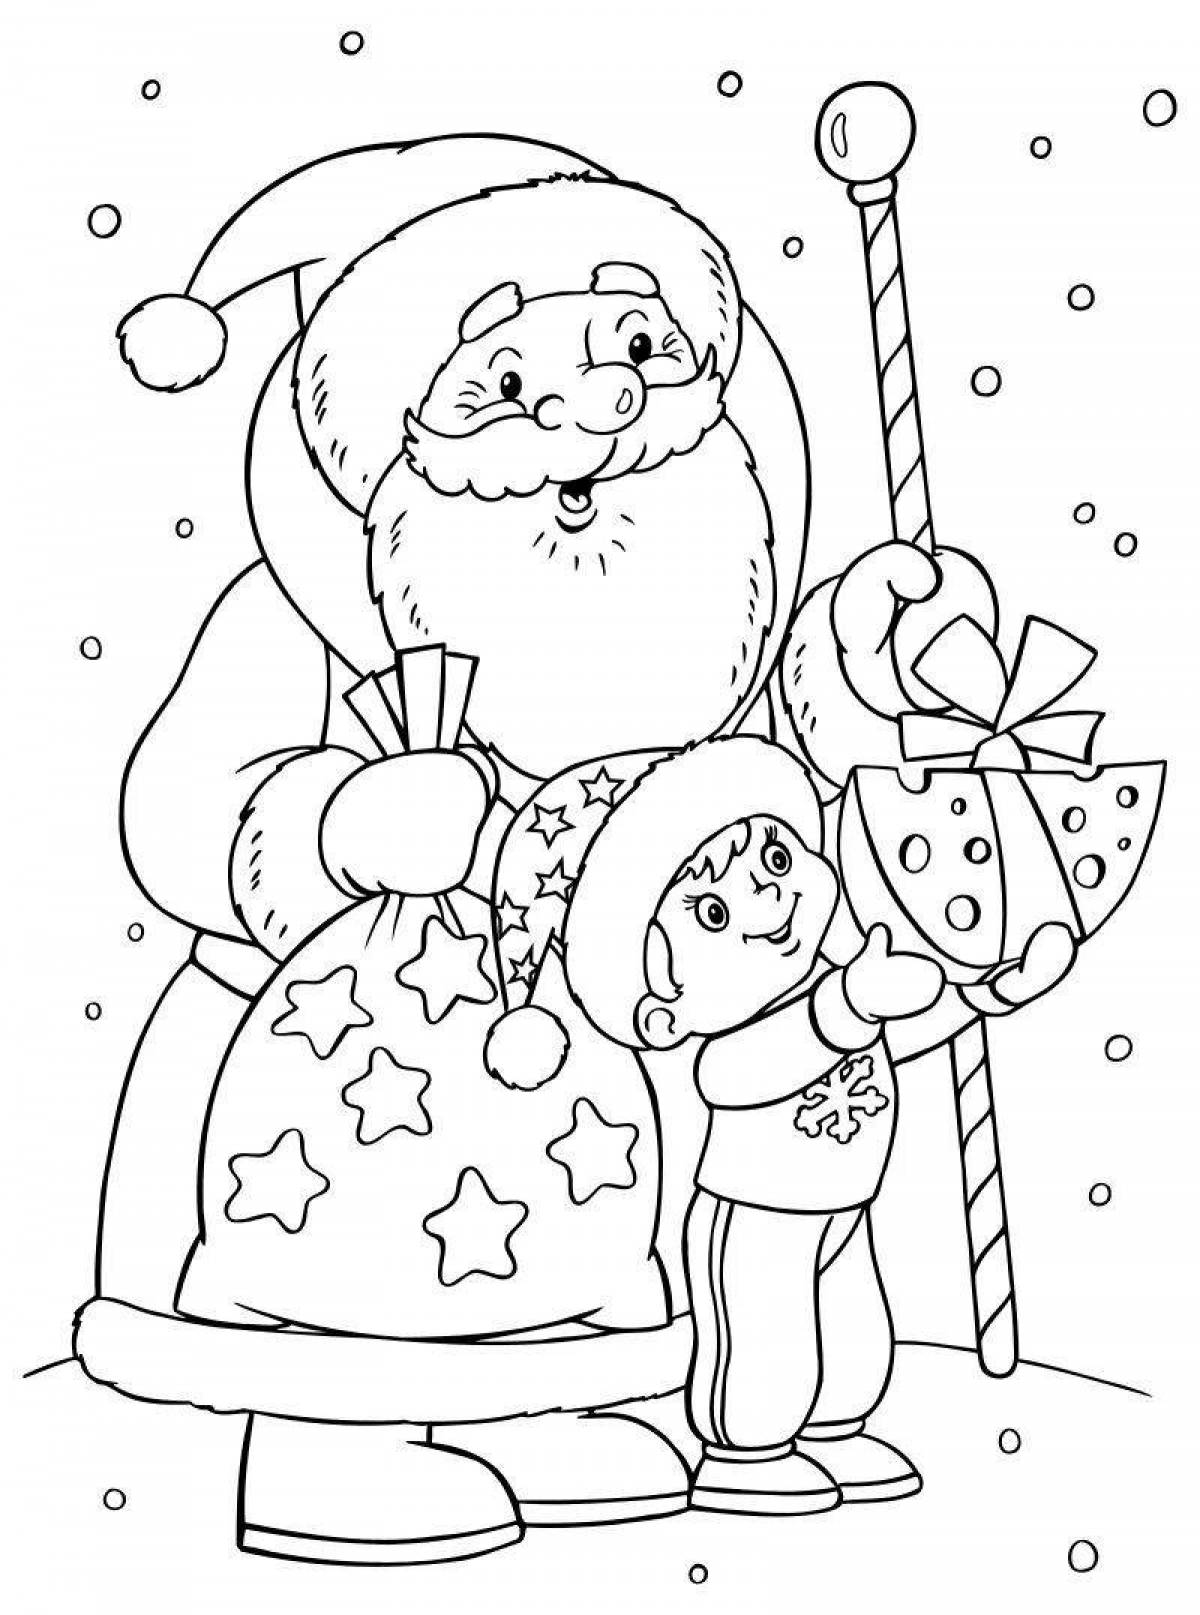 Exquisite Santa Claus and Snow Maiden Christmas coloring book